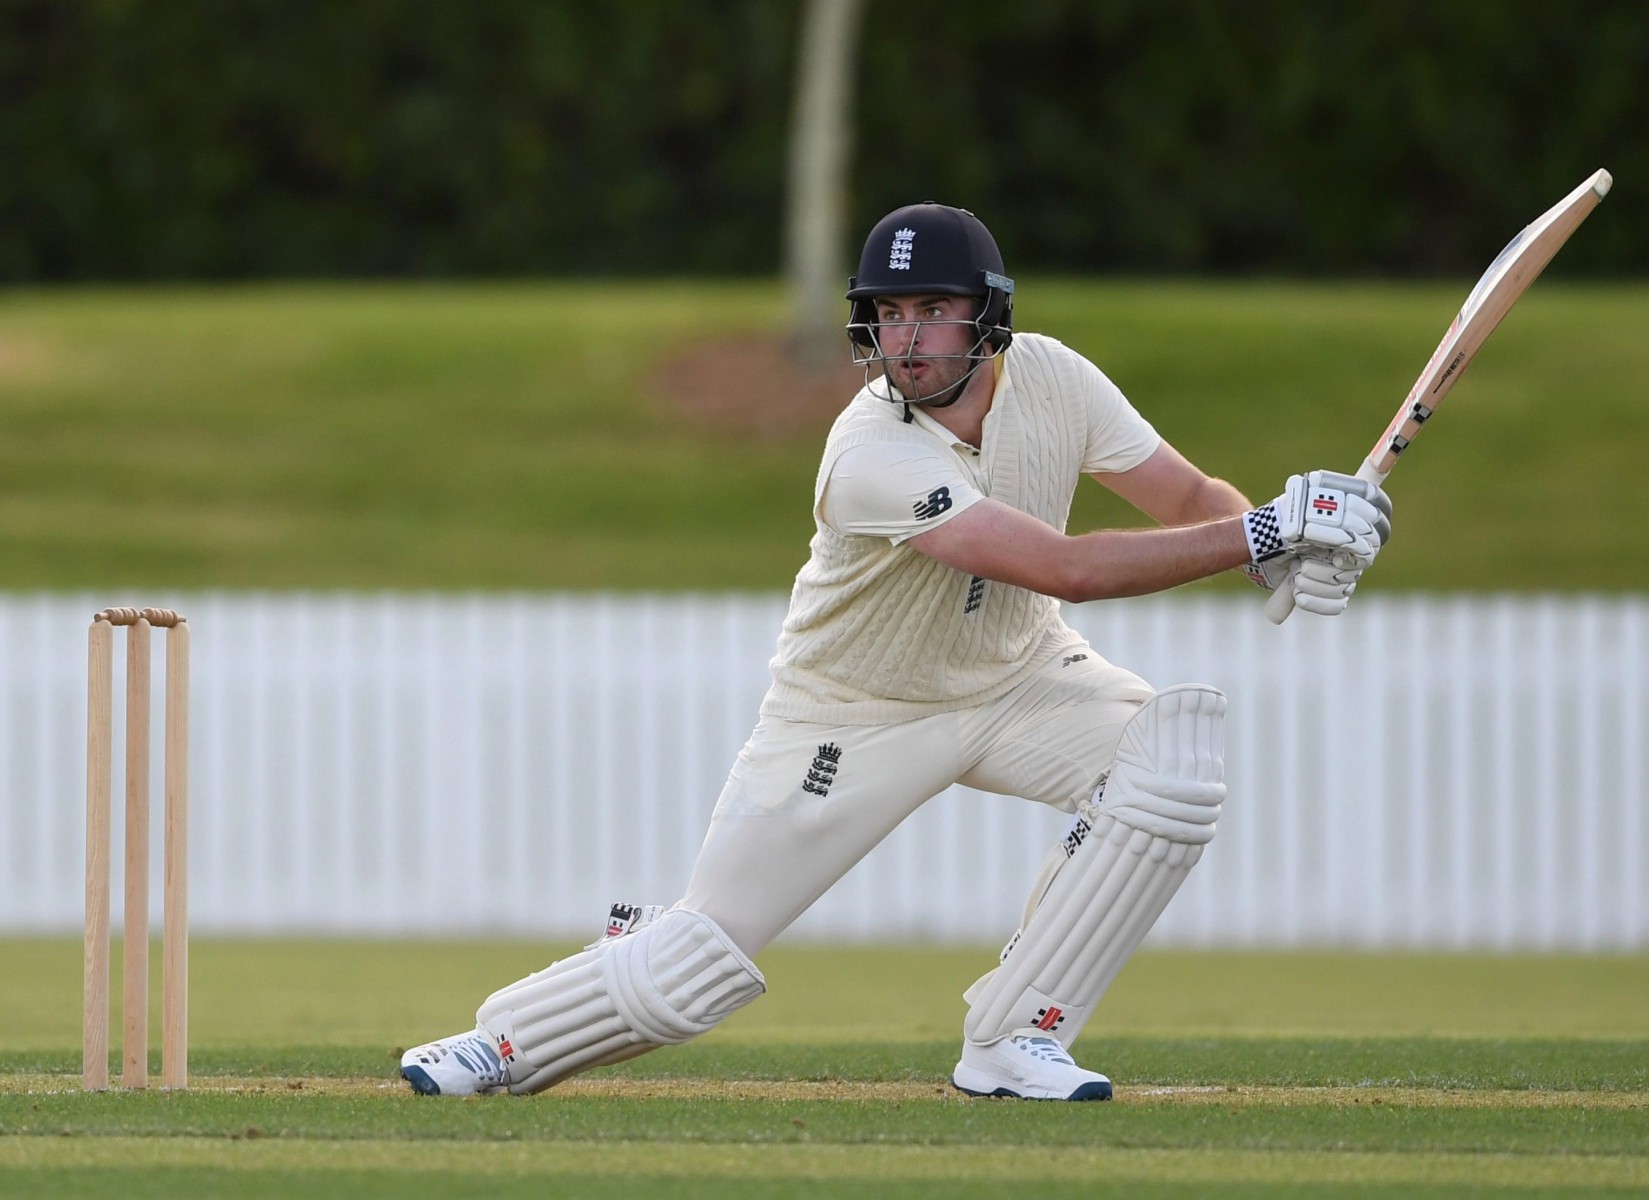 , Sibley was picked for Englands tour of New Zealand to bat and bat  and he did that perfectly with century on debut